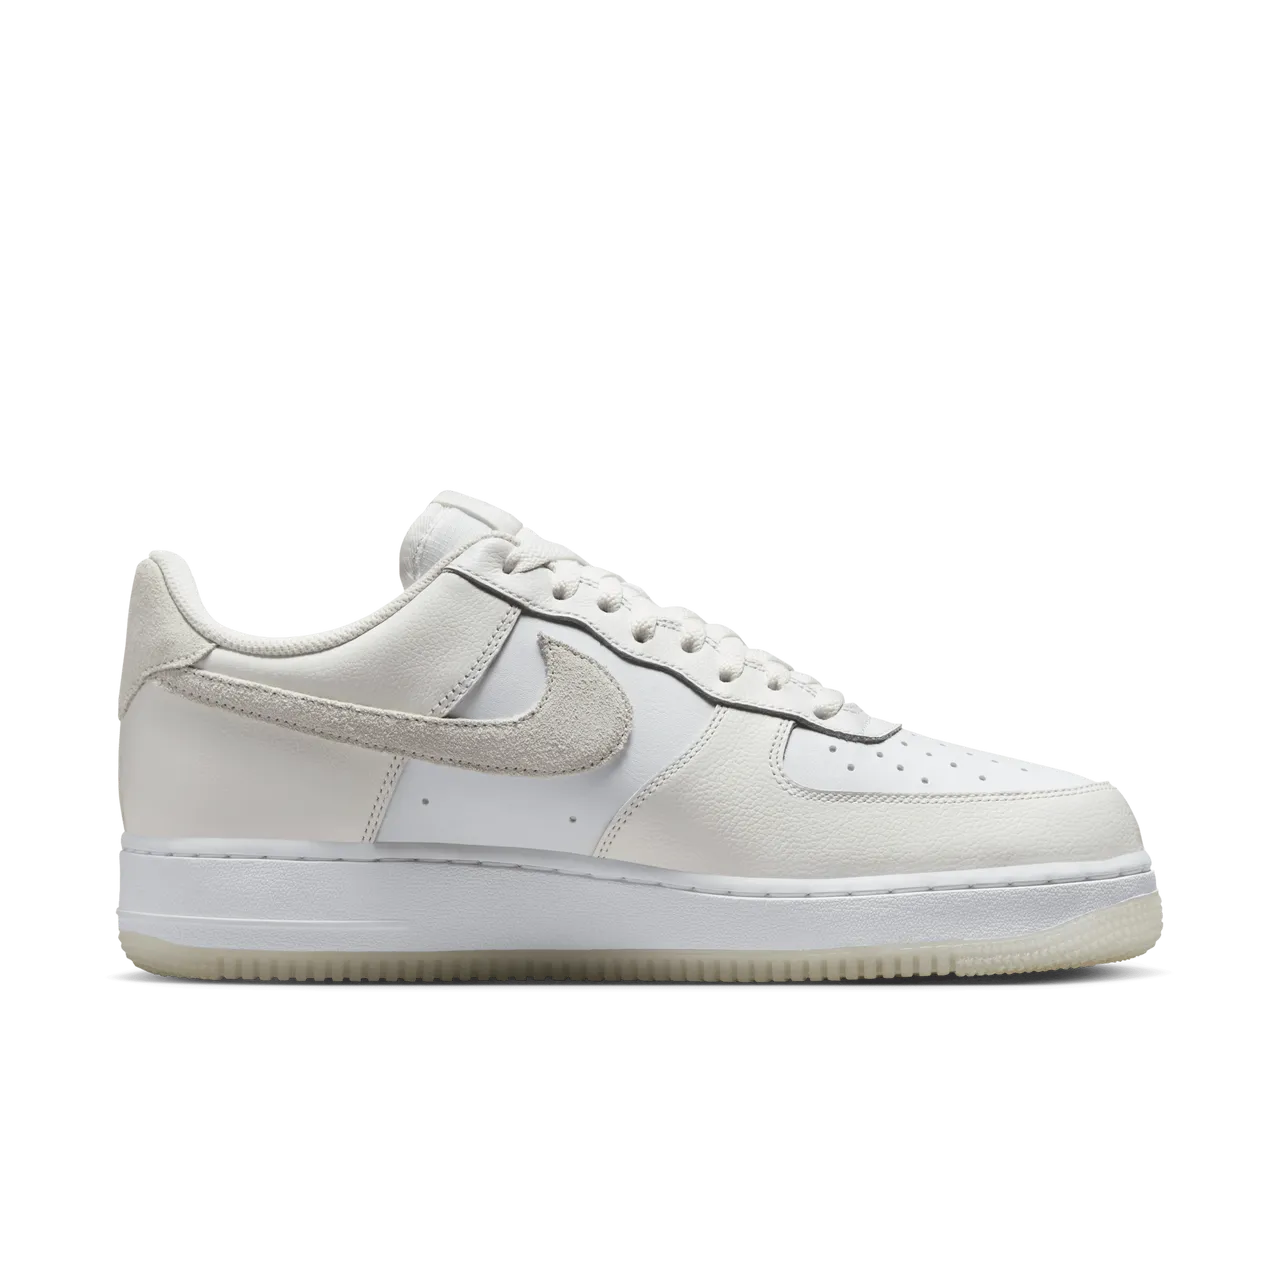 Nike Air Force 1 '07 LV8 Men's Shoes - White